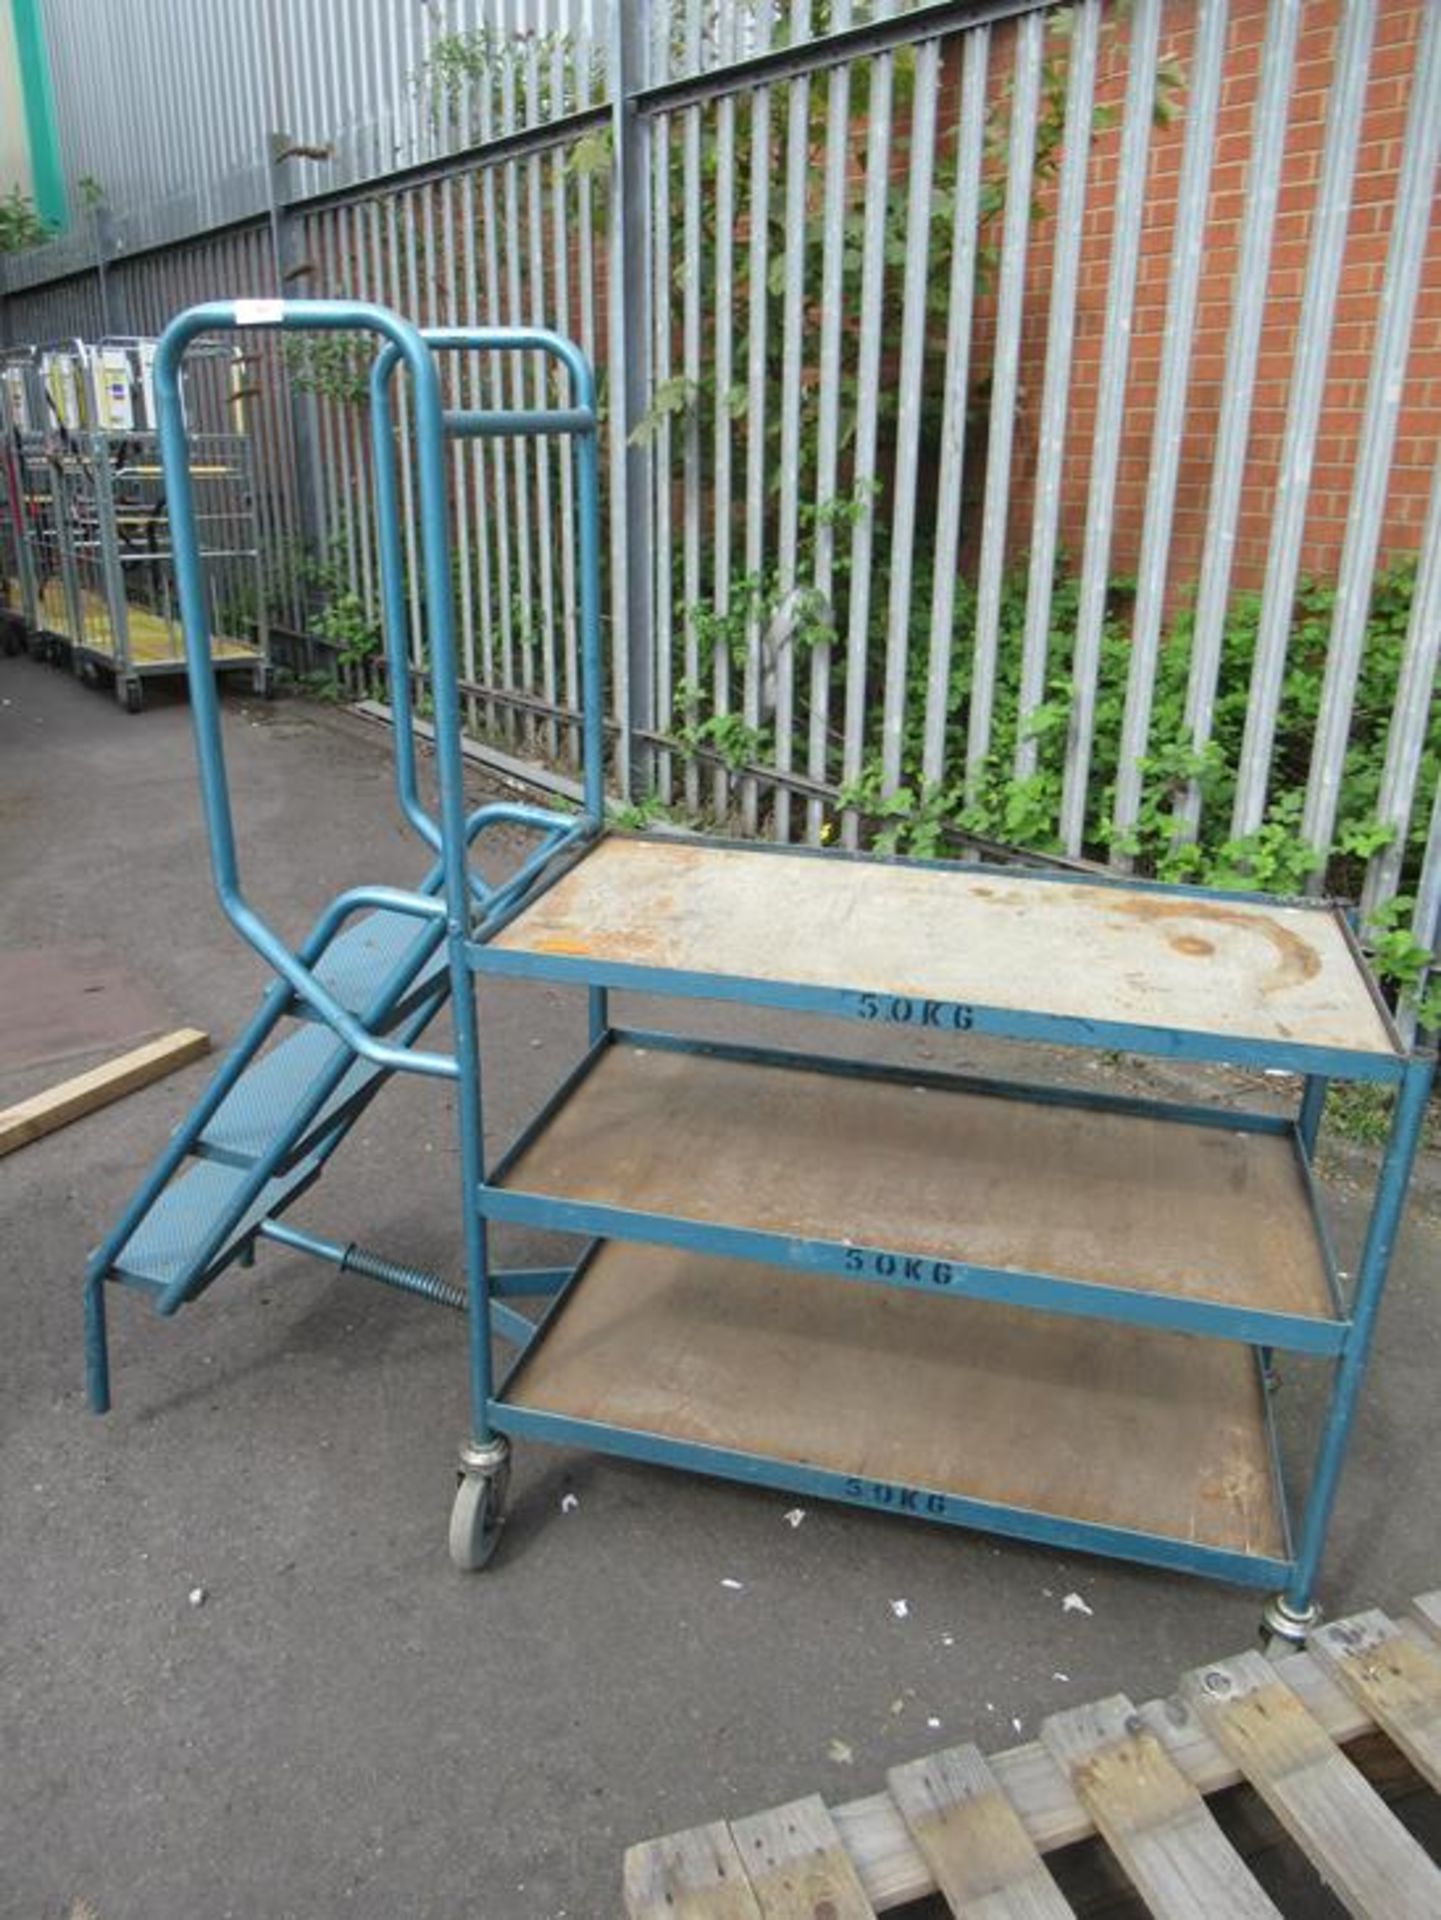 A 3 tier trolley with pull out steps and 2x metal framed tables